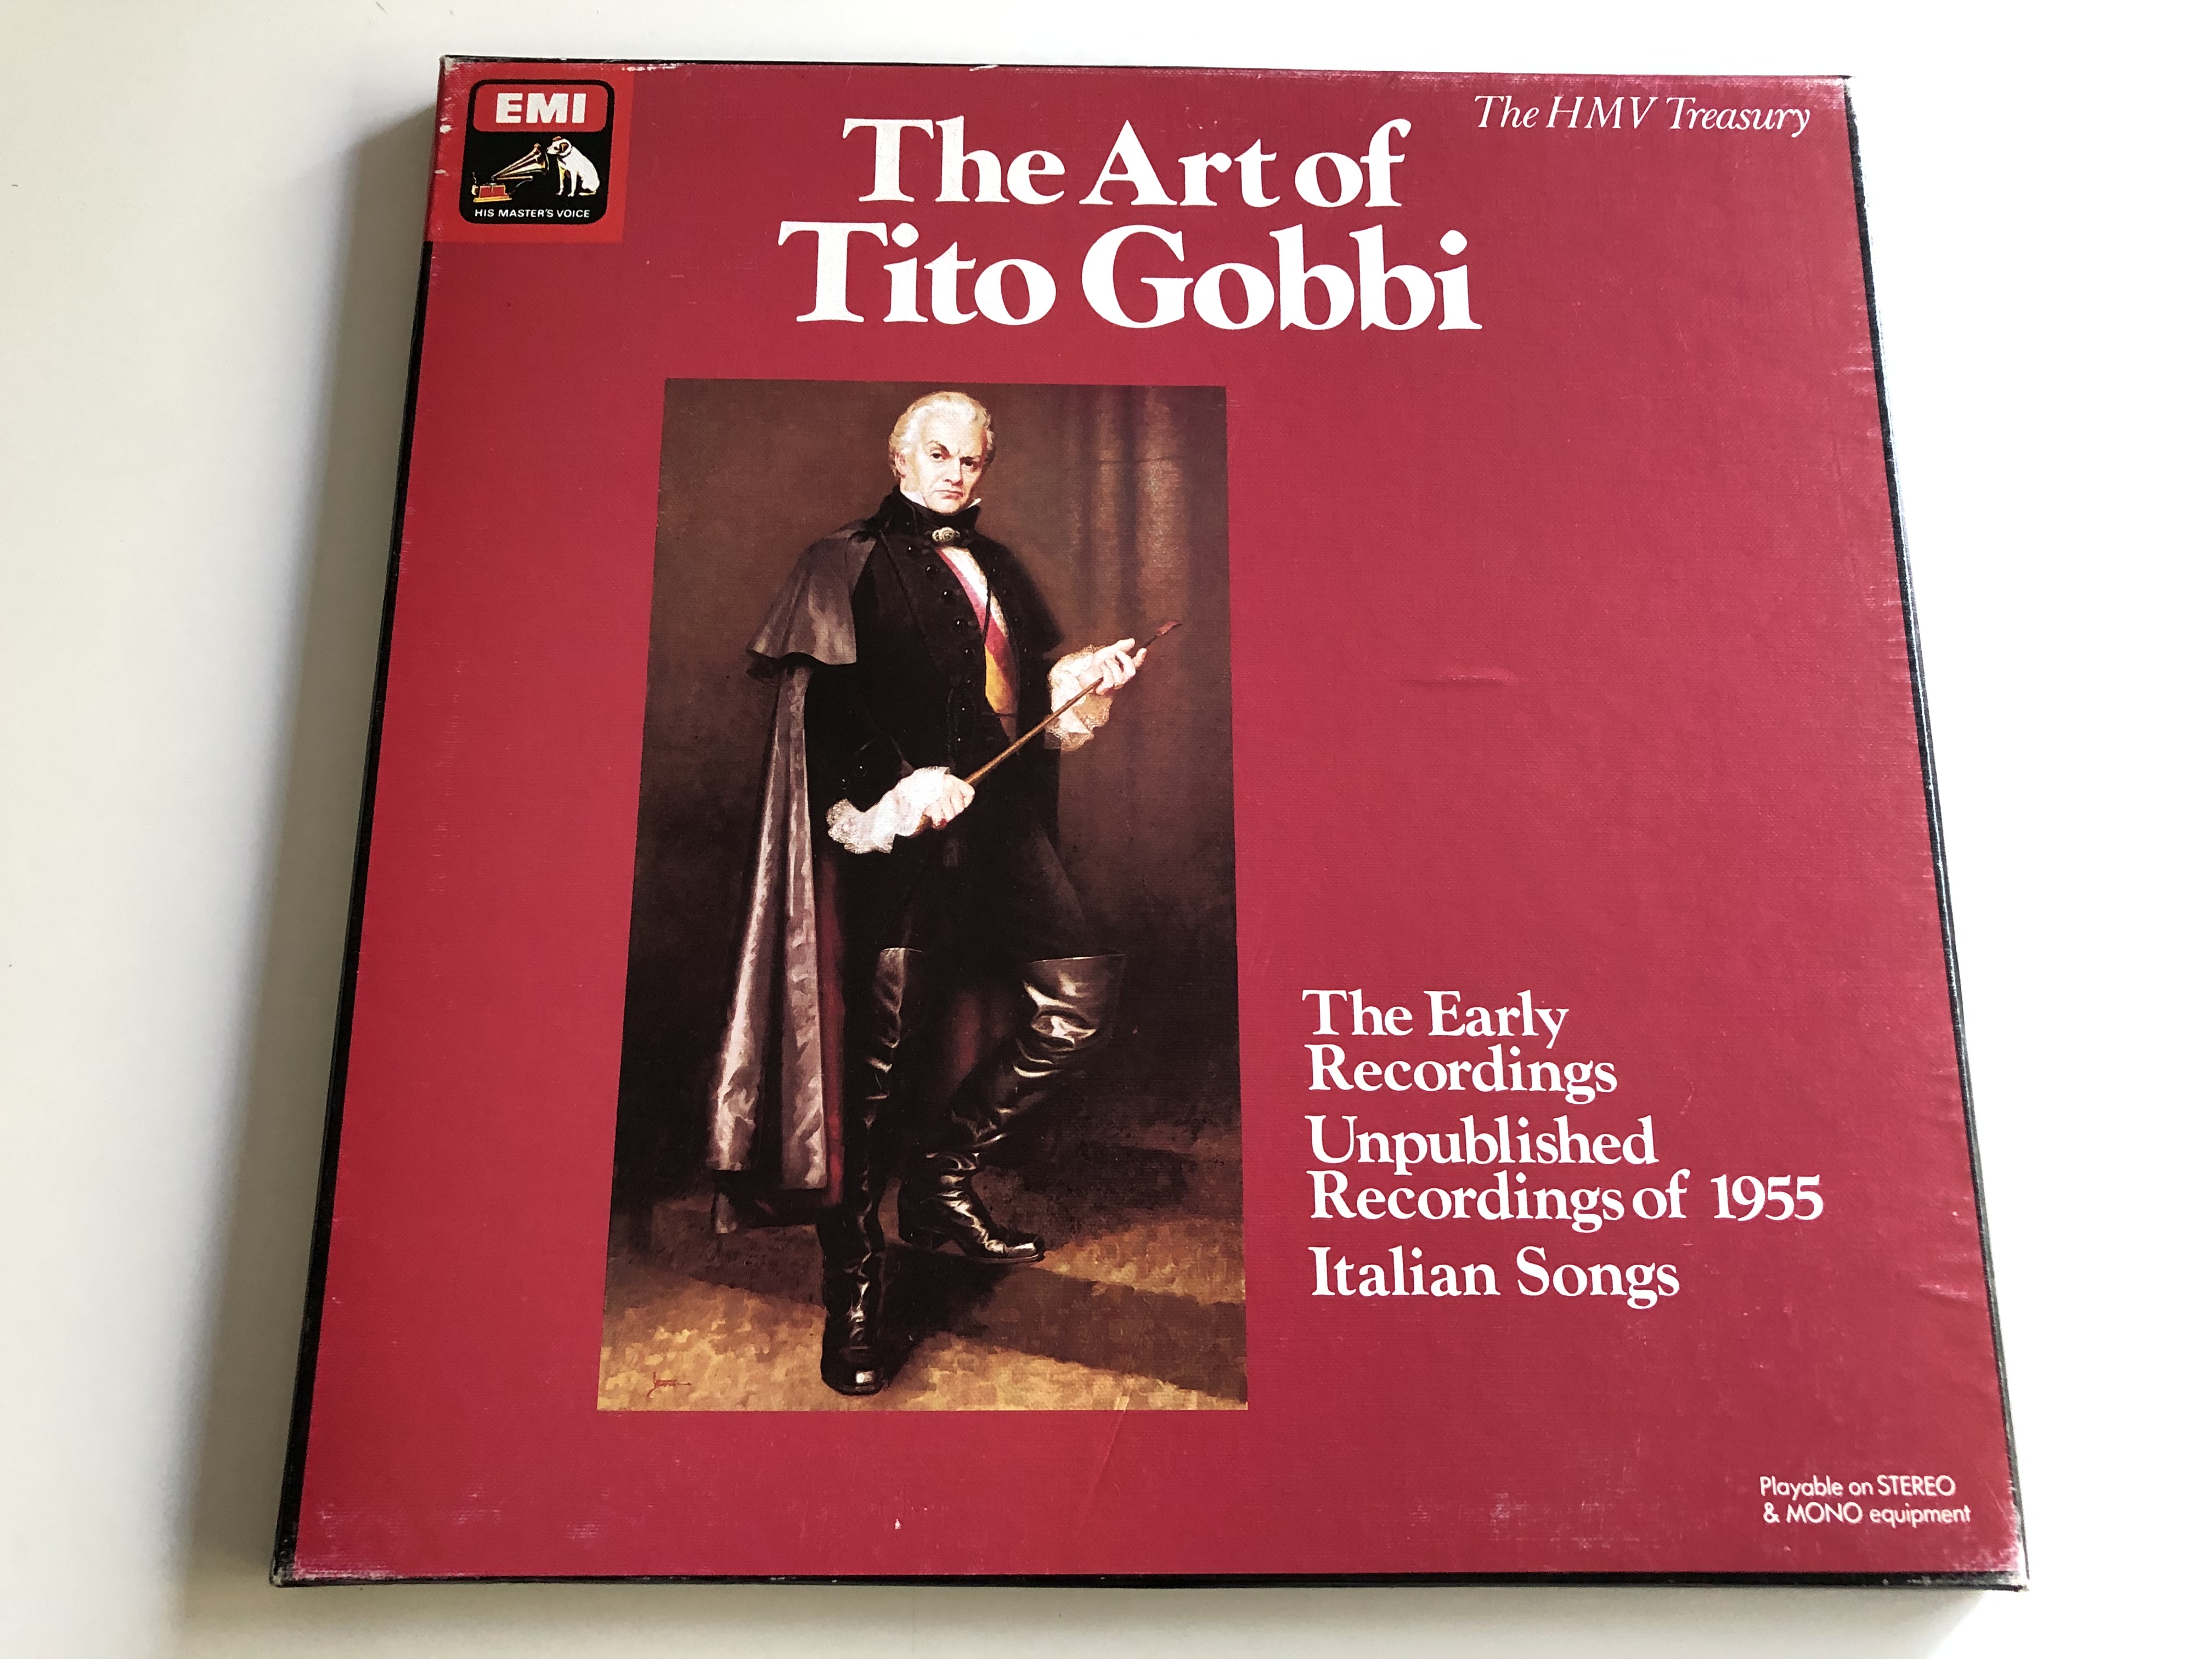 the-art-of-tito-gobbi-the-early-recordings-unpublished-recprdings-of-1955-italian-songs-his-master-s-voice-3x-lp-stereo-mono-rls-738-1-.jpg